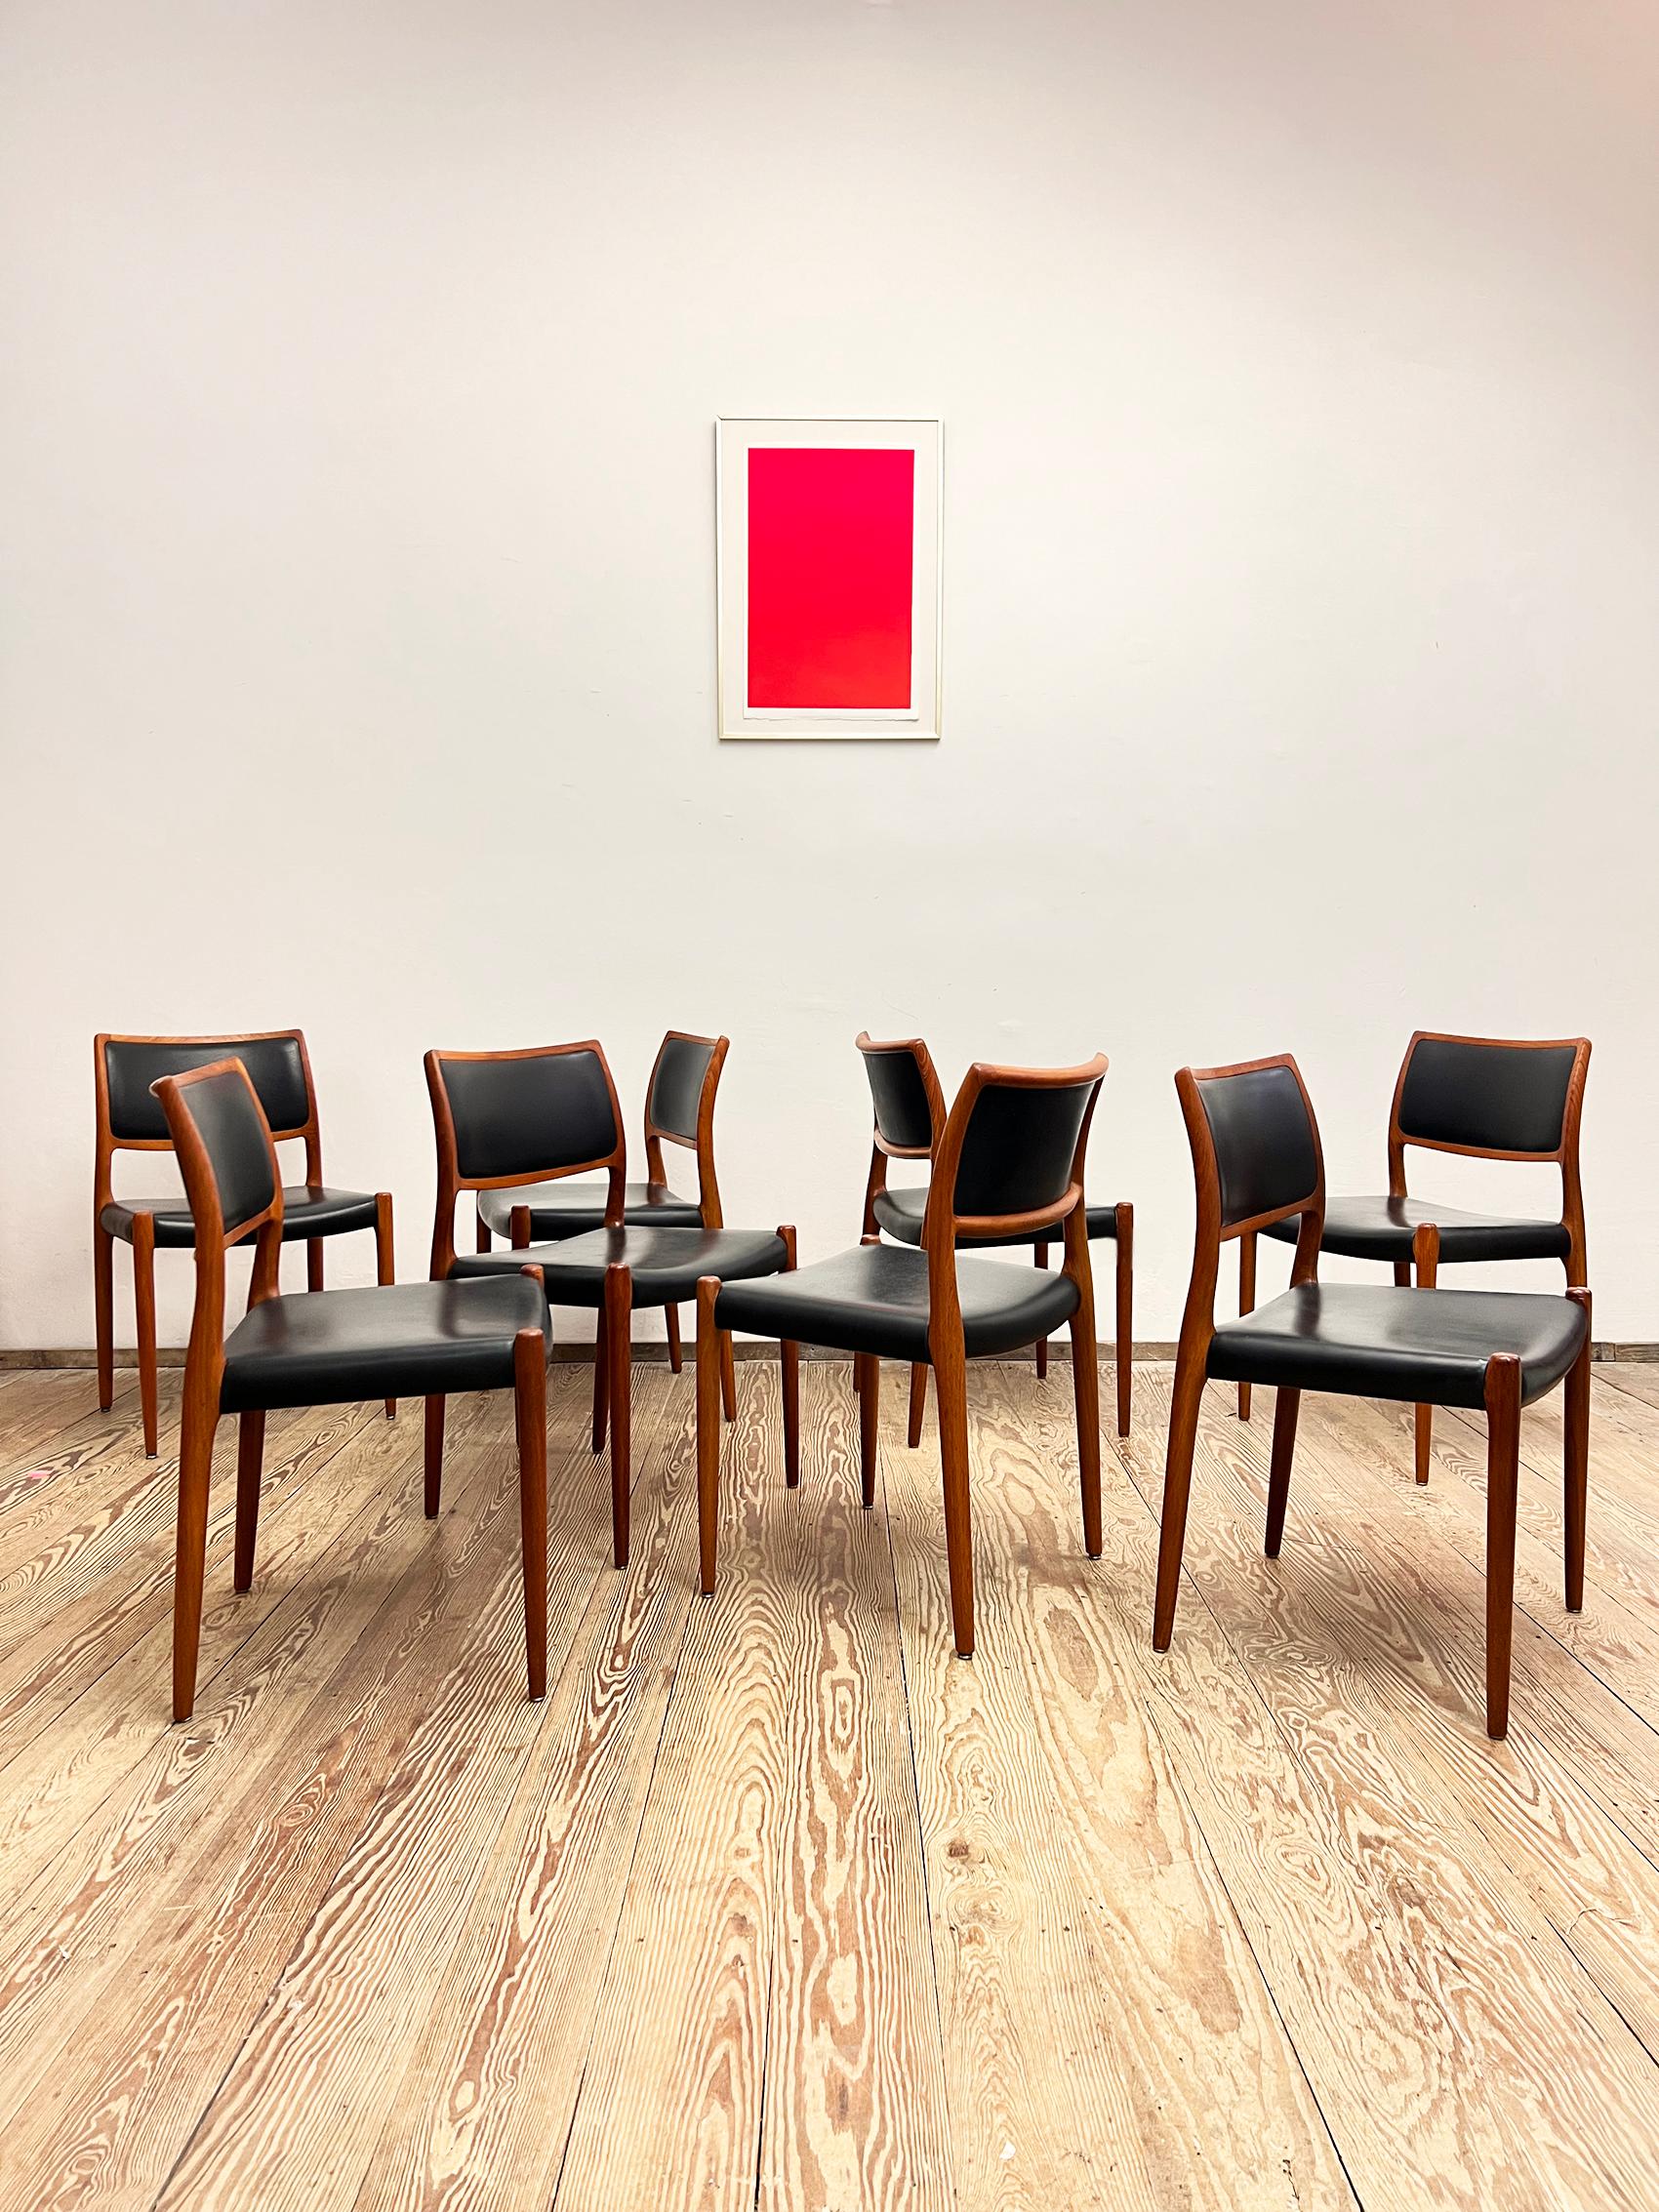 Dimensions: 48x50x78x44cm (width x depth x height x seat height)

This beautiful set of danish dining chairs designed by Niels O. Møller in the late 1960s was manufactured by J.L. Møllers in Denmark. The set features 8 chairs of Niels O. Møllers